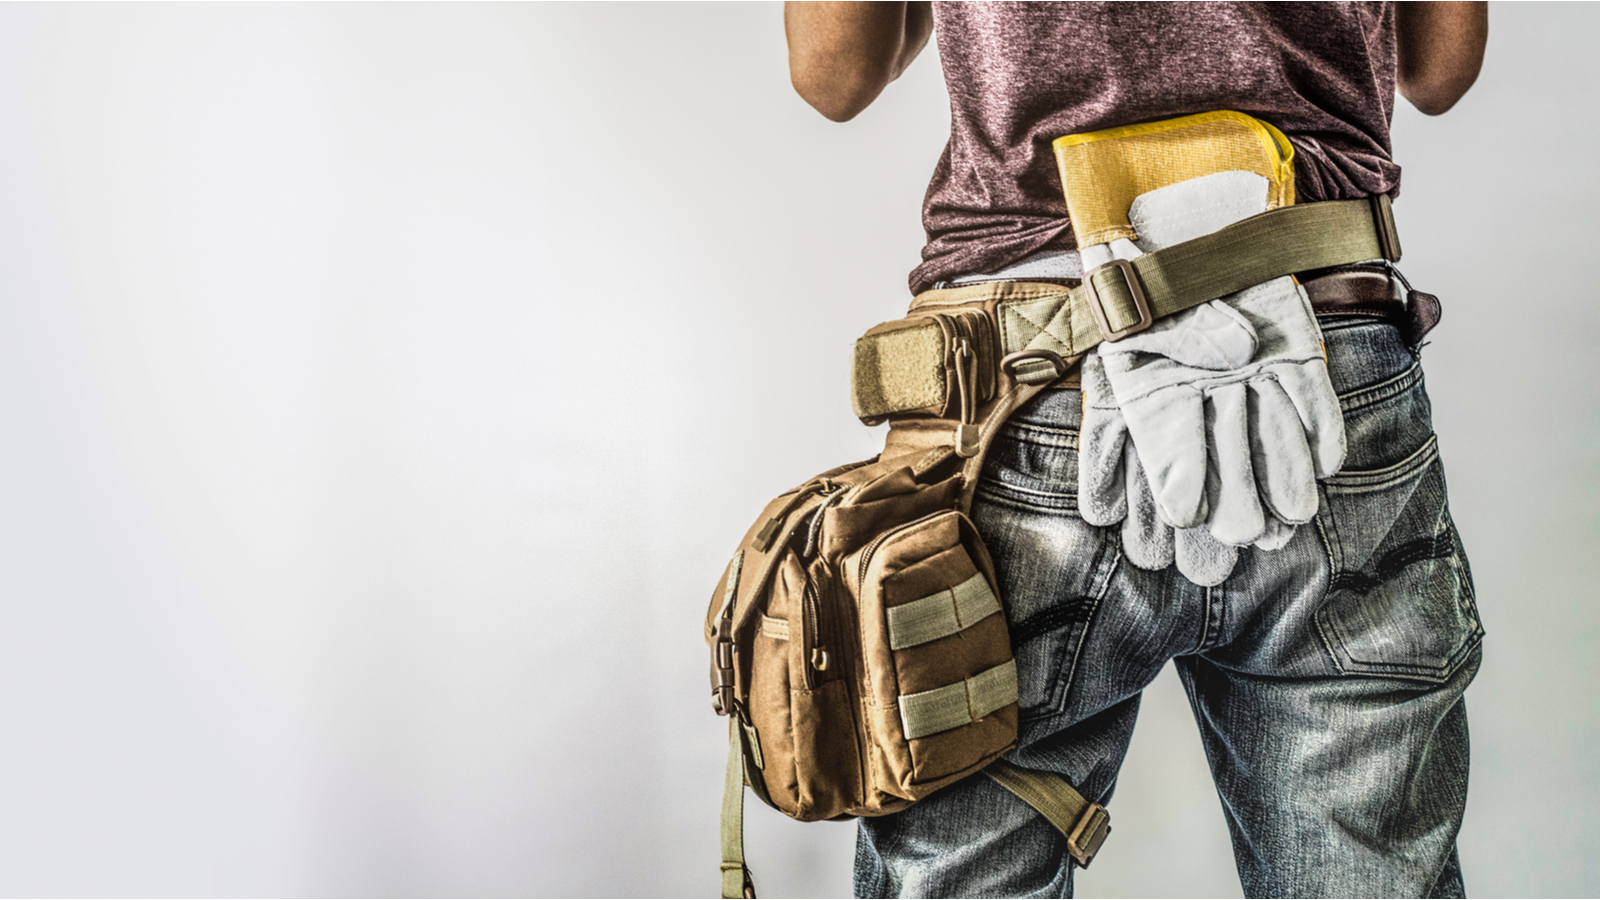 A man in dirty clothes with a tool belt around his waist representing the TBLT stock.